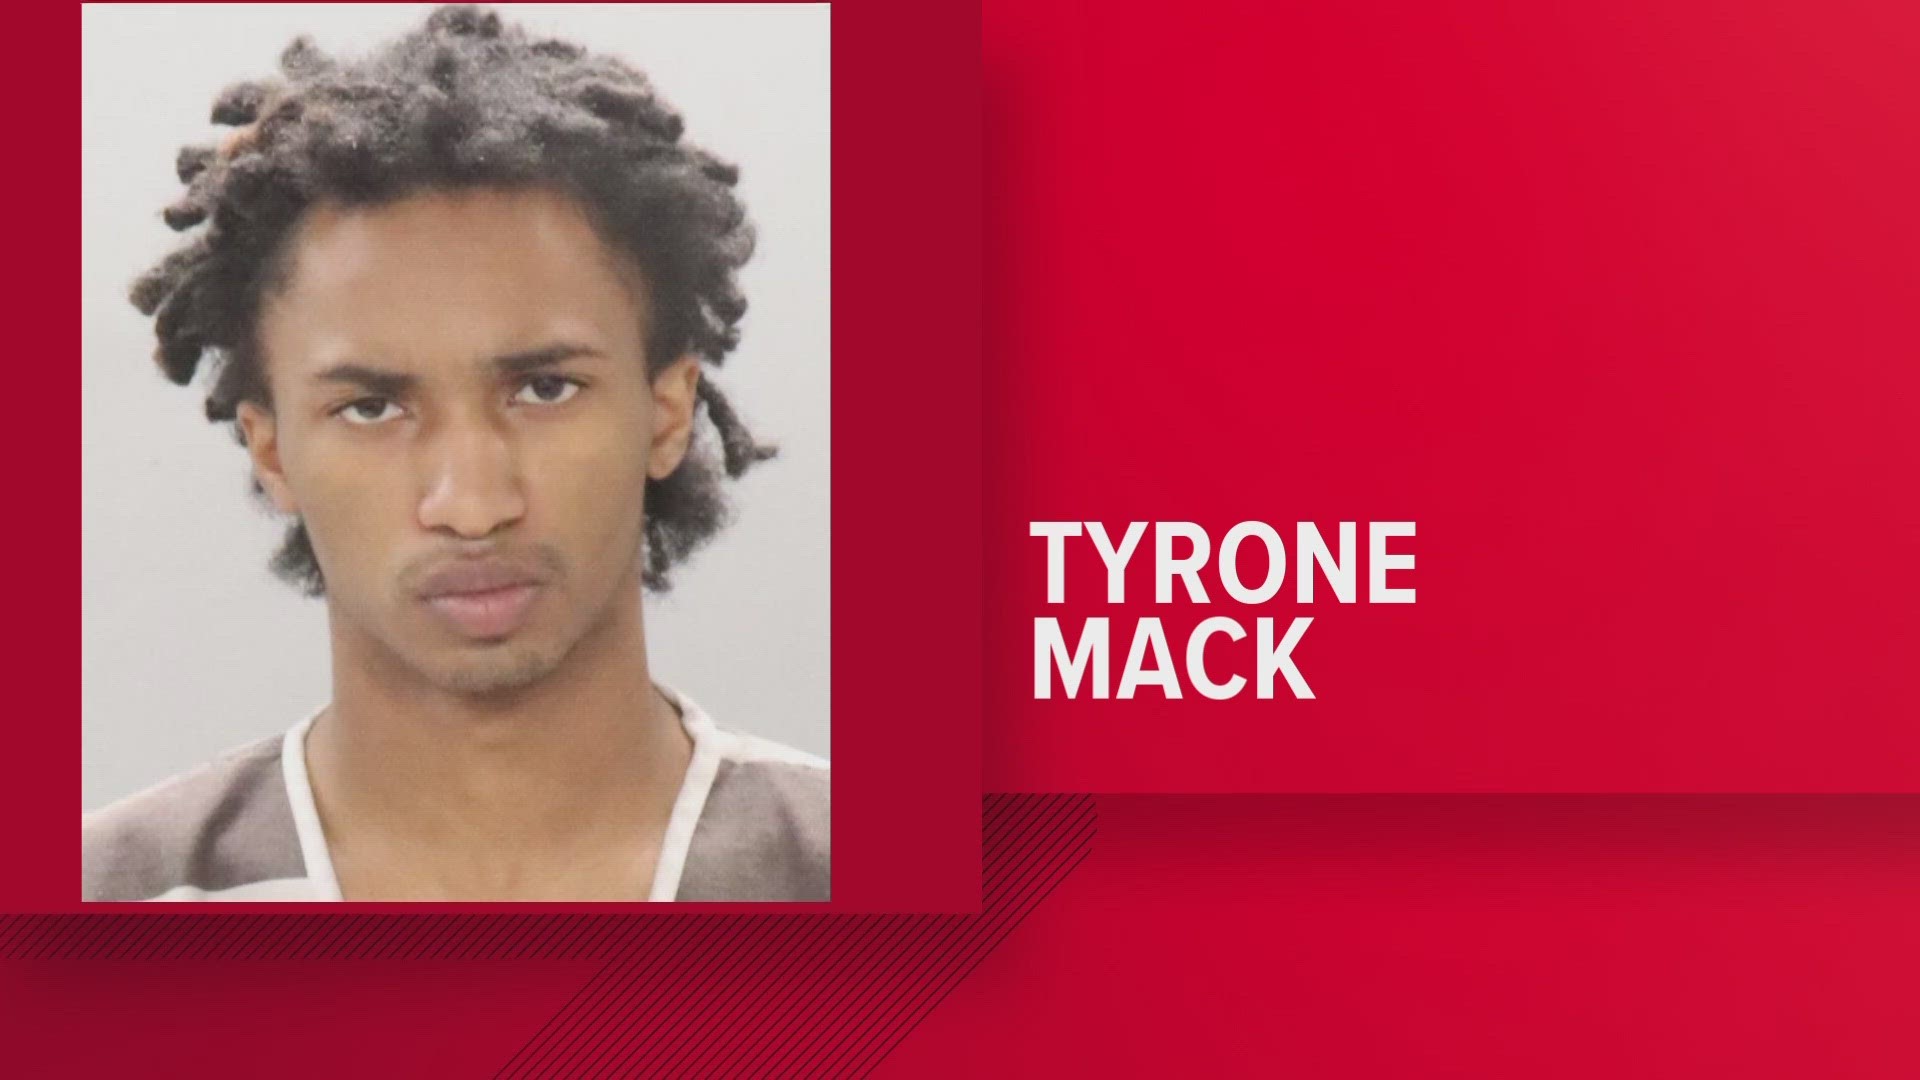 Tyrone Mack has been charged with first-degree murder for the death of Alma Matias. Jason Young was the first to be charged with first-degree murder.